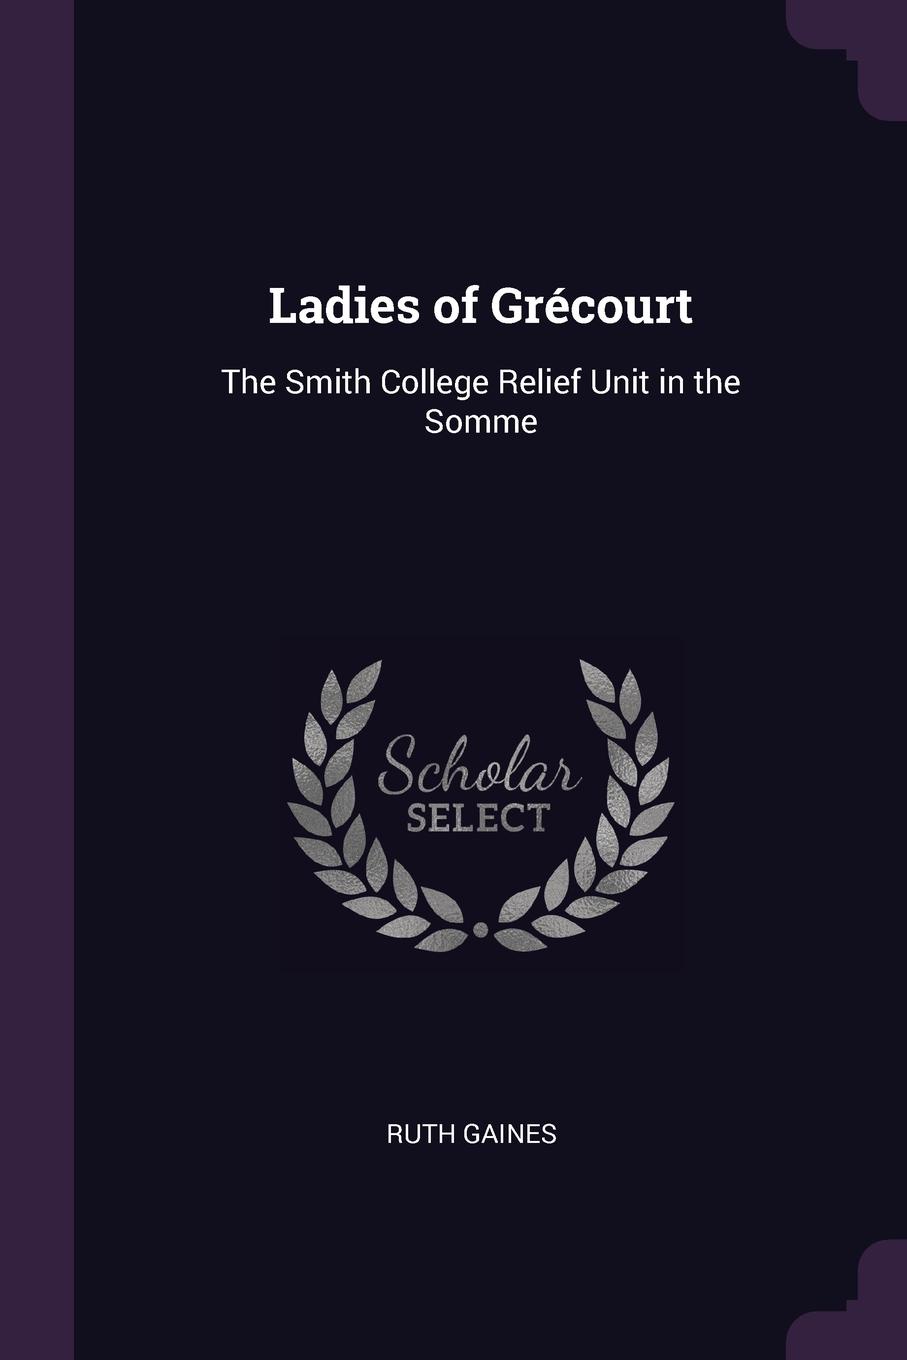 Ladies of Grecourt. The Smith College Relief Unit in the Somme